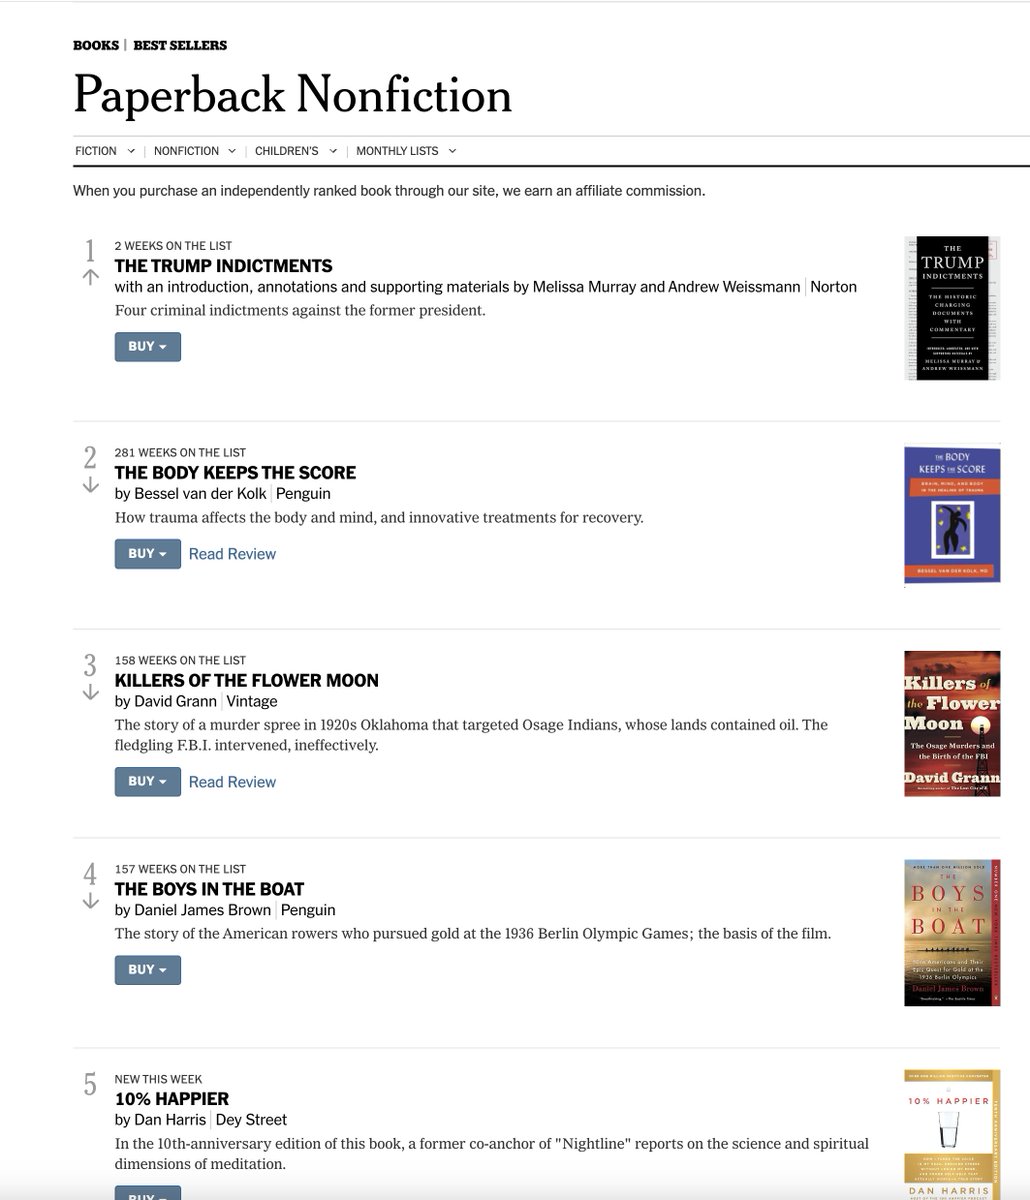 OMG!!! 'The Trump Indictments' by me and @AWeissmann_ is #1 on the @nytimes Bestsellers List!!!!! Thank you, thank you, thank you to the great folks @wwnorton and all of the readers who bought the book!!